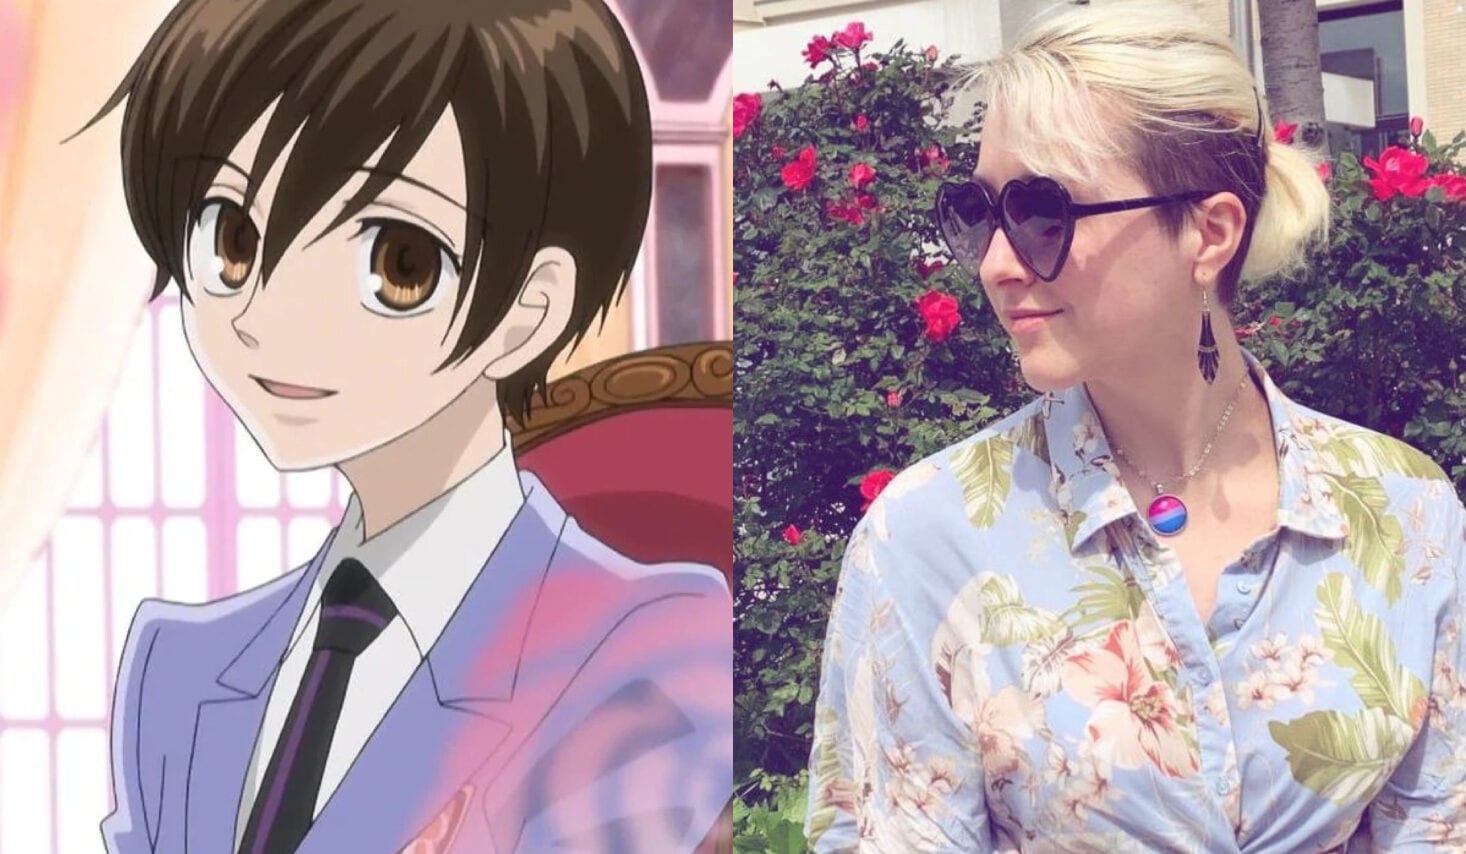 “It’s what’s on the inside that counts”: How Haruhi Fujioka helped me embrace being genderfluid